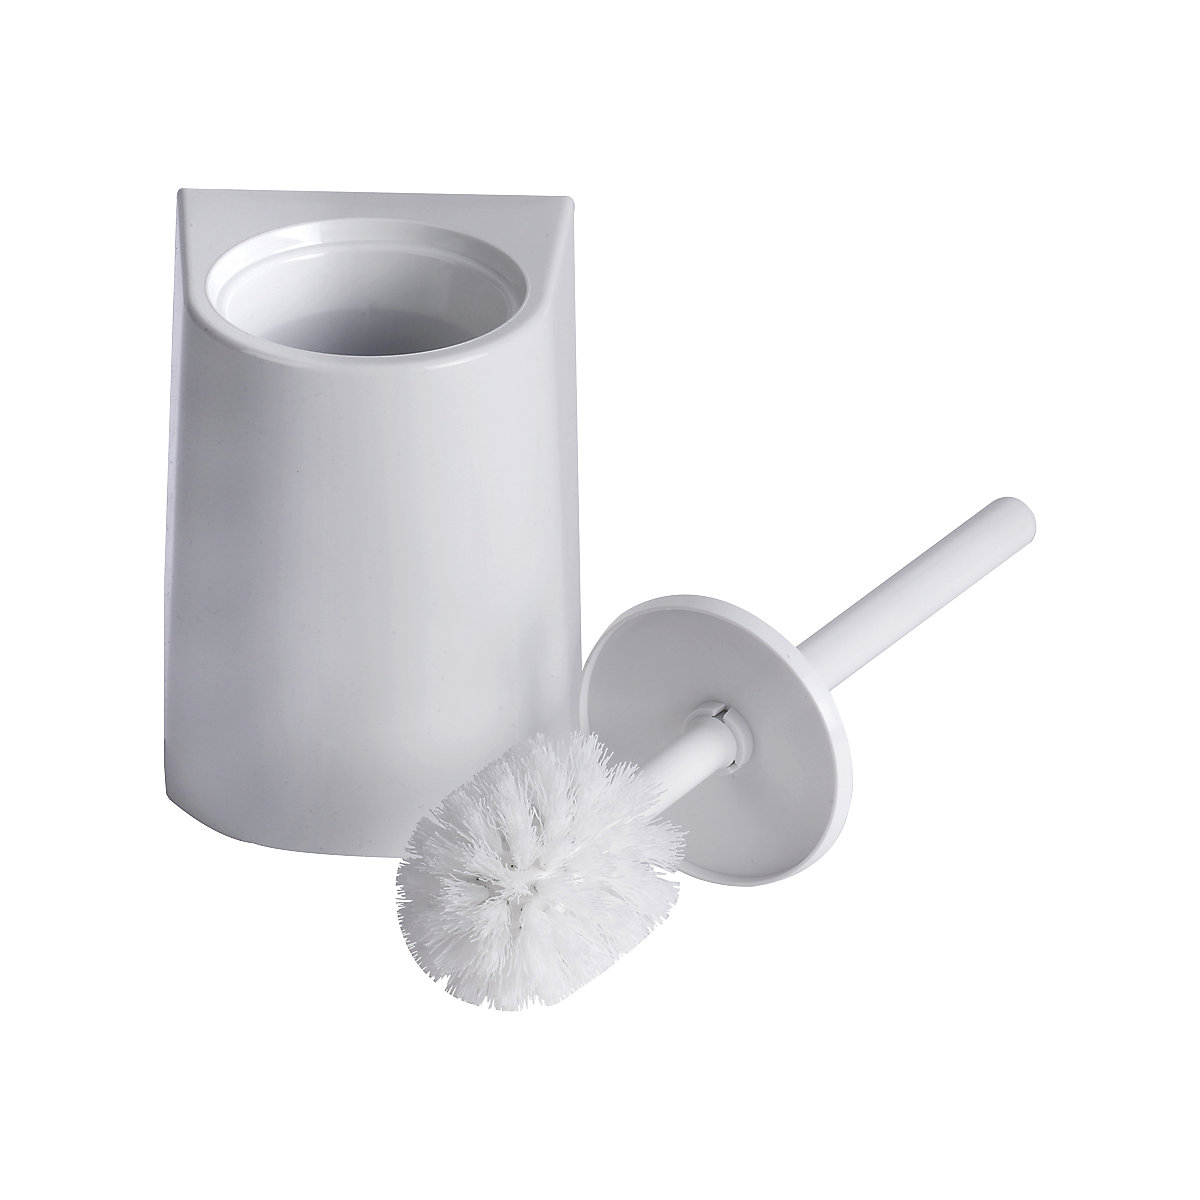 ParadiseLine toilet brush with odour seal – CWS